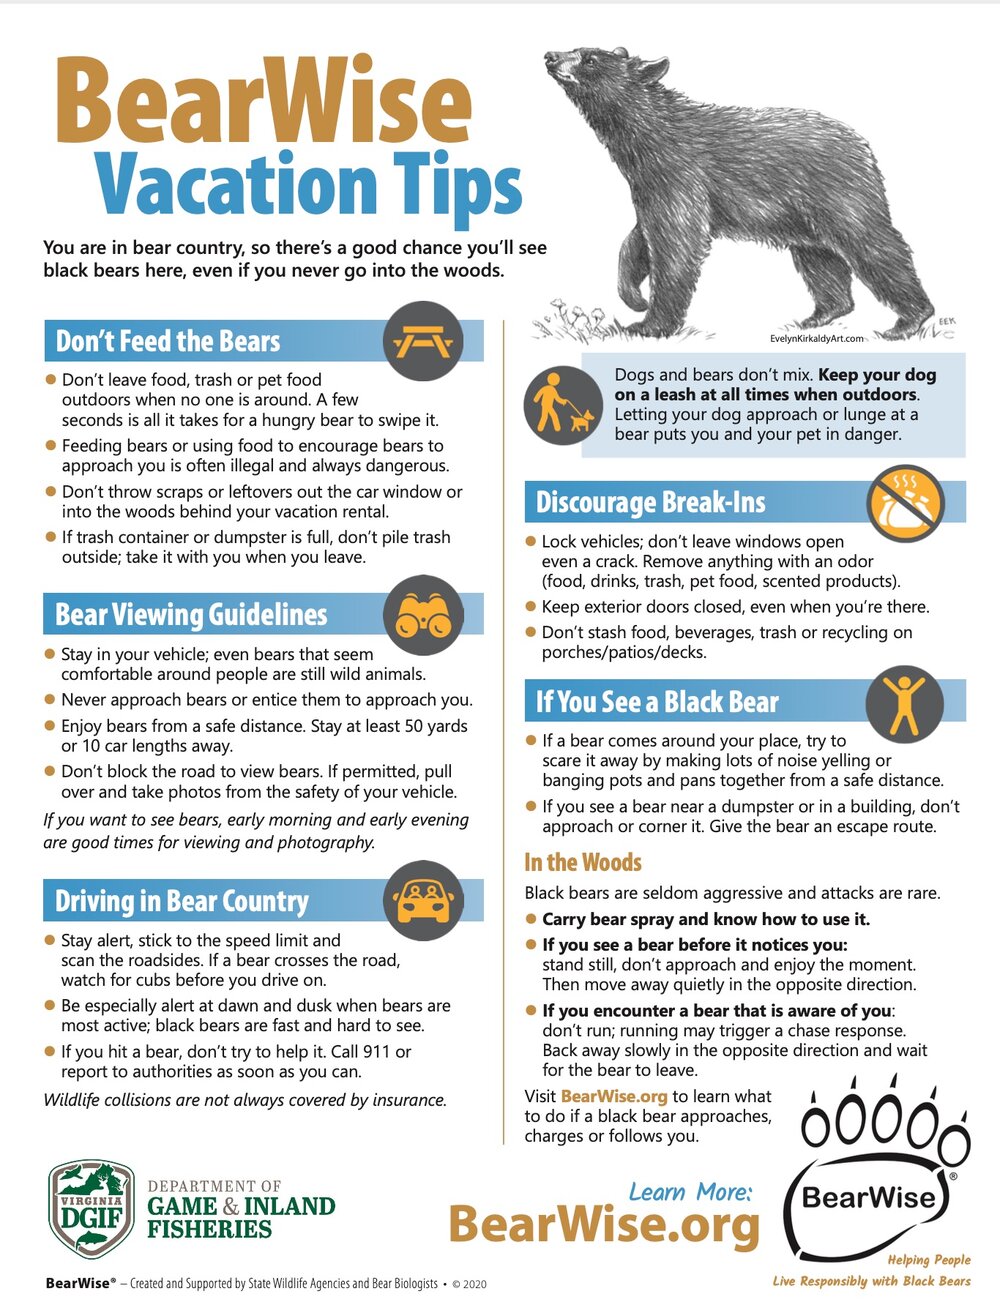 New guide about bears for homeowners, vacationers, and visitors —  Wintergreen Property Owners Association